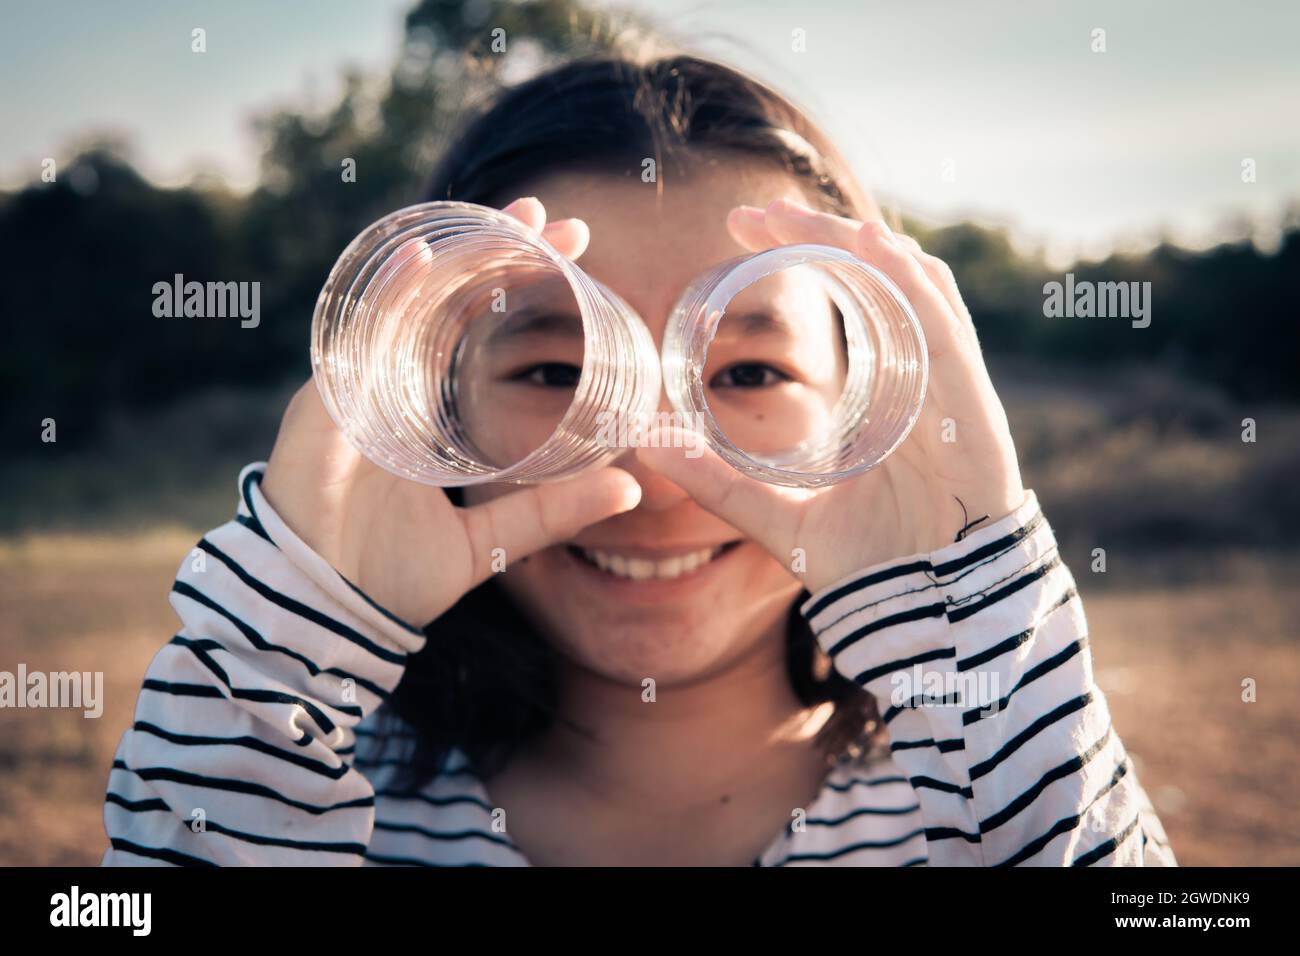 Portrait Of Smiling Girl Looking Through Hole In Plastic Stock Photo